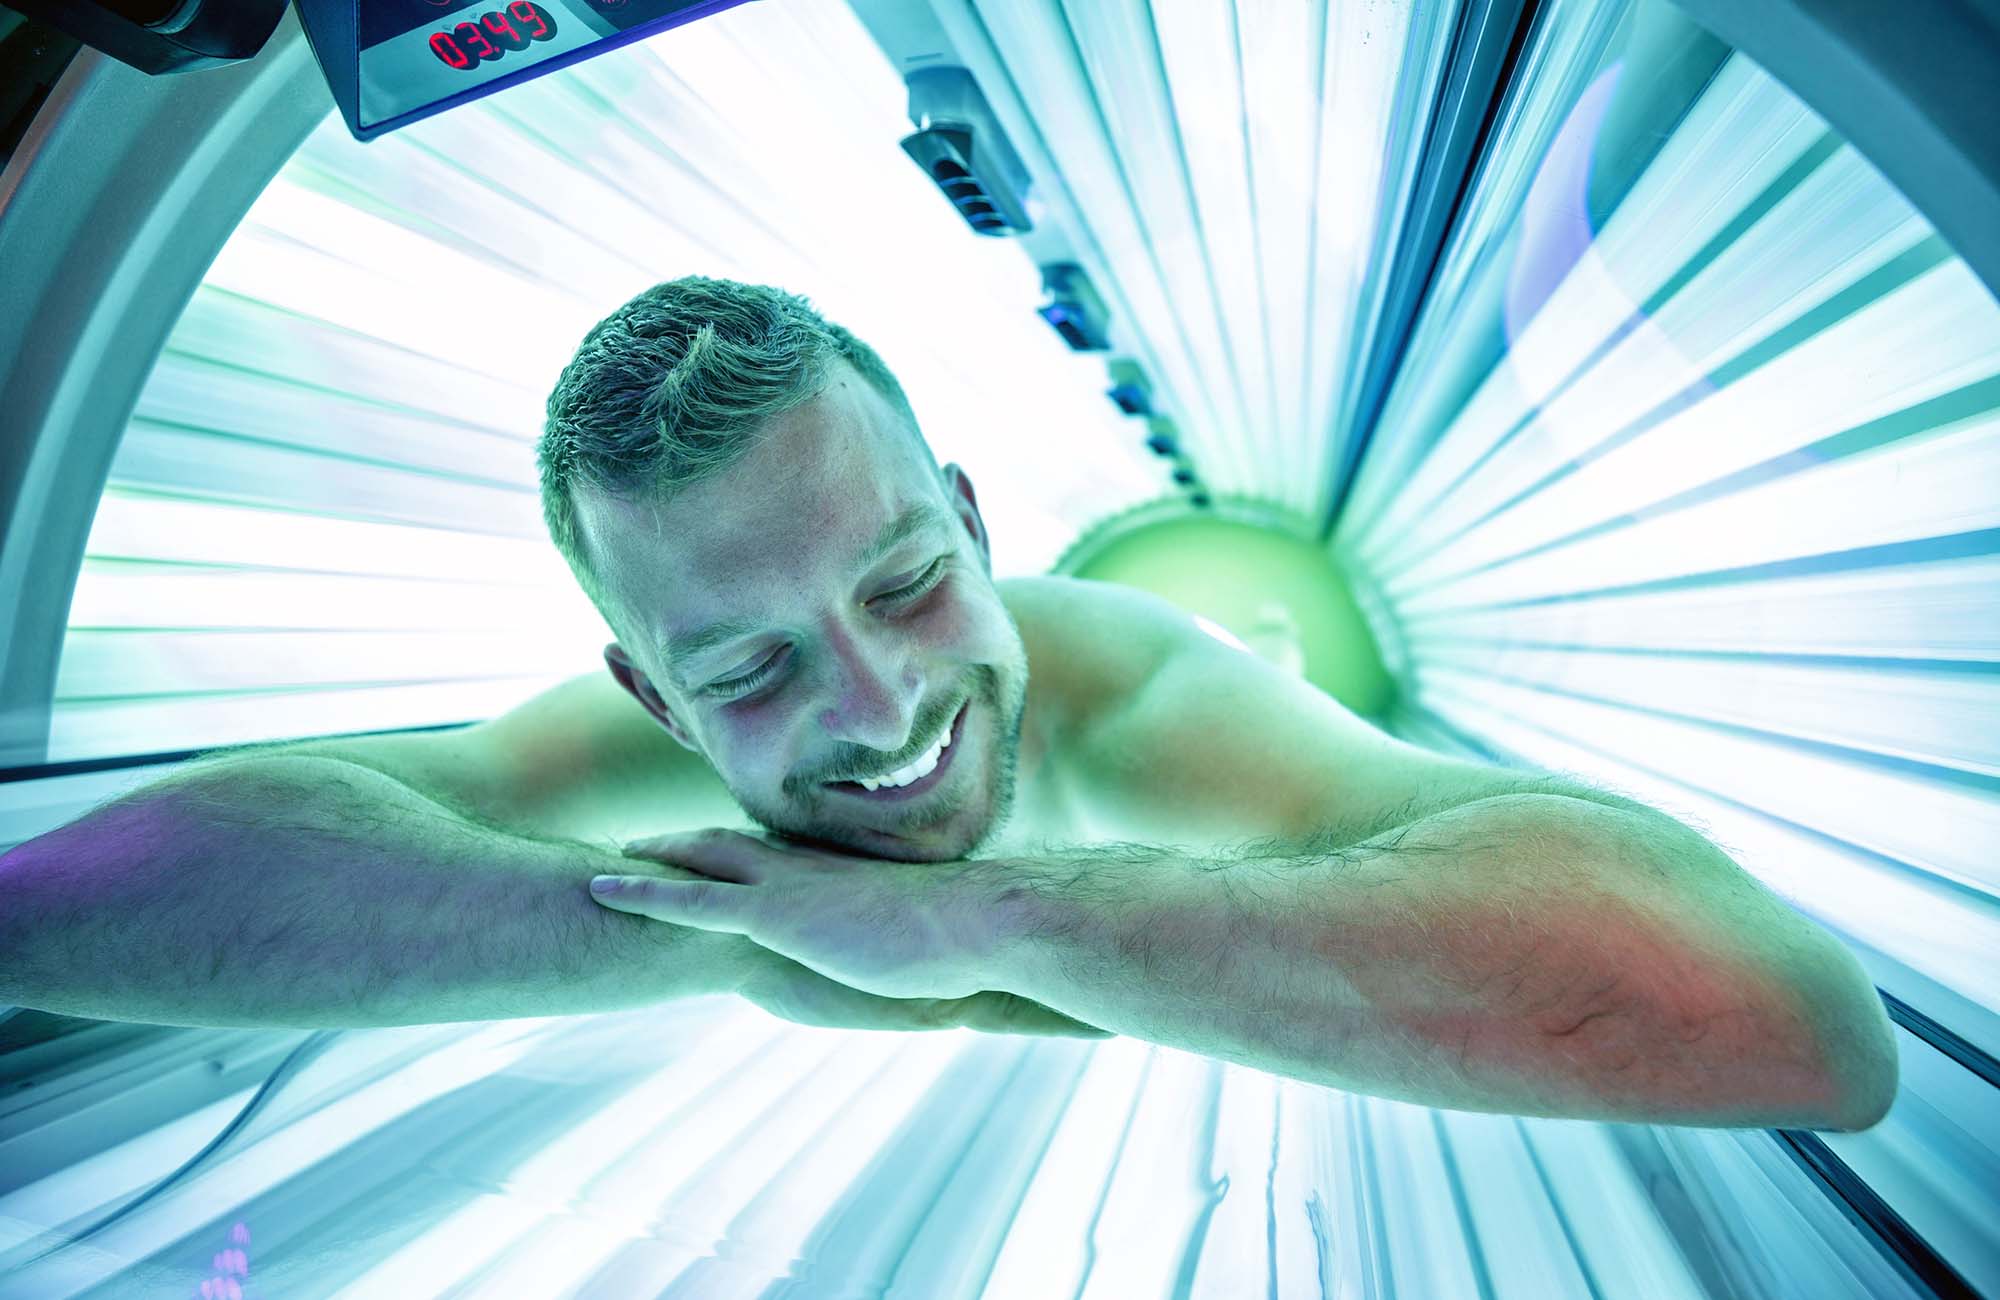 Man in sunbed relaxing and enjoying while getting a tan